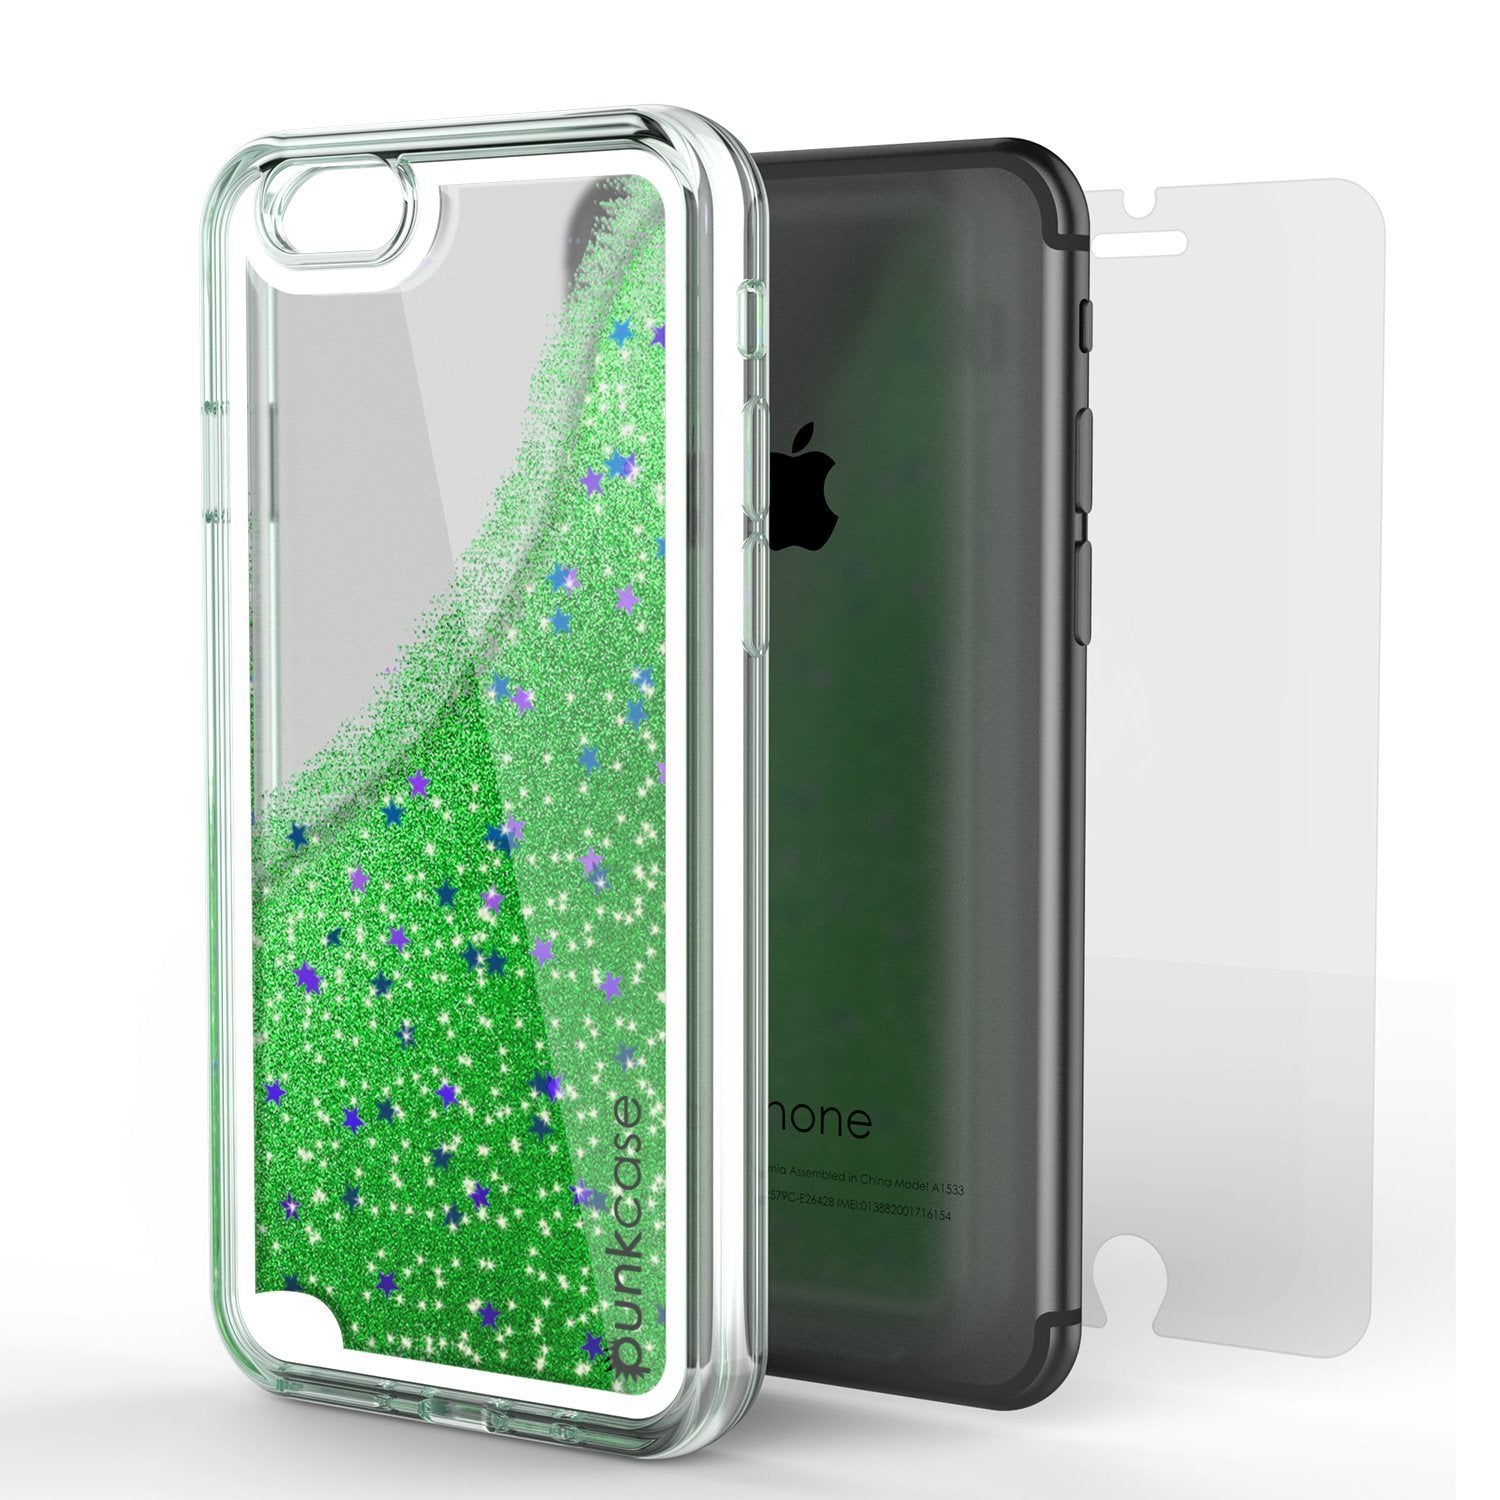 iPhone 8 Case, PunkCase Liquid Green, Floating Glitter Cover Series